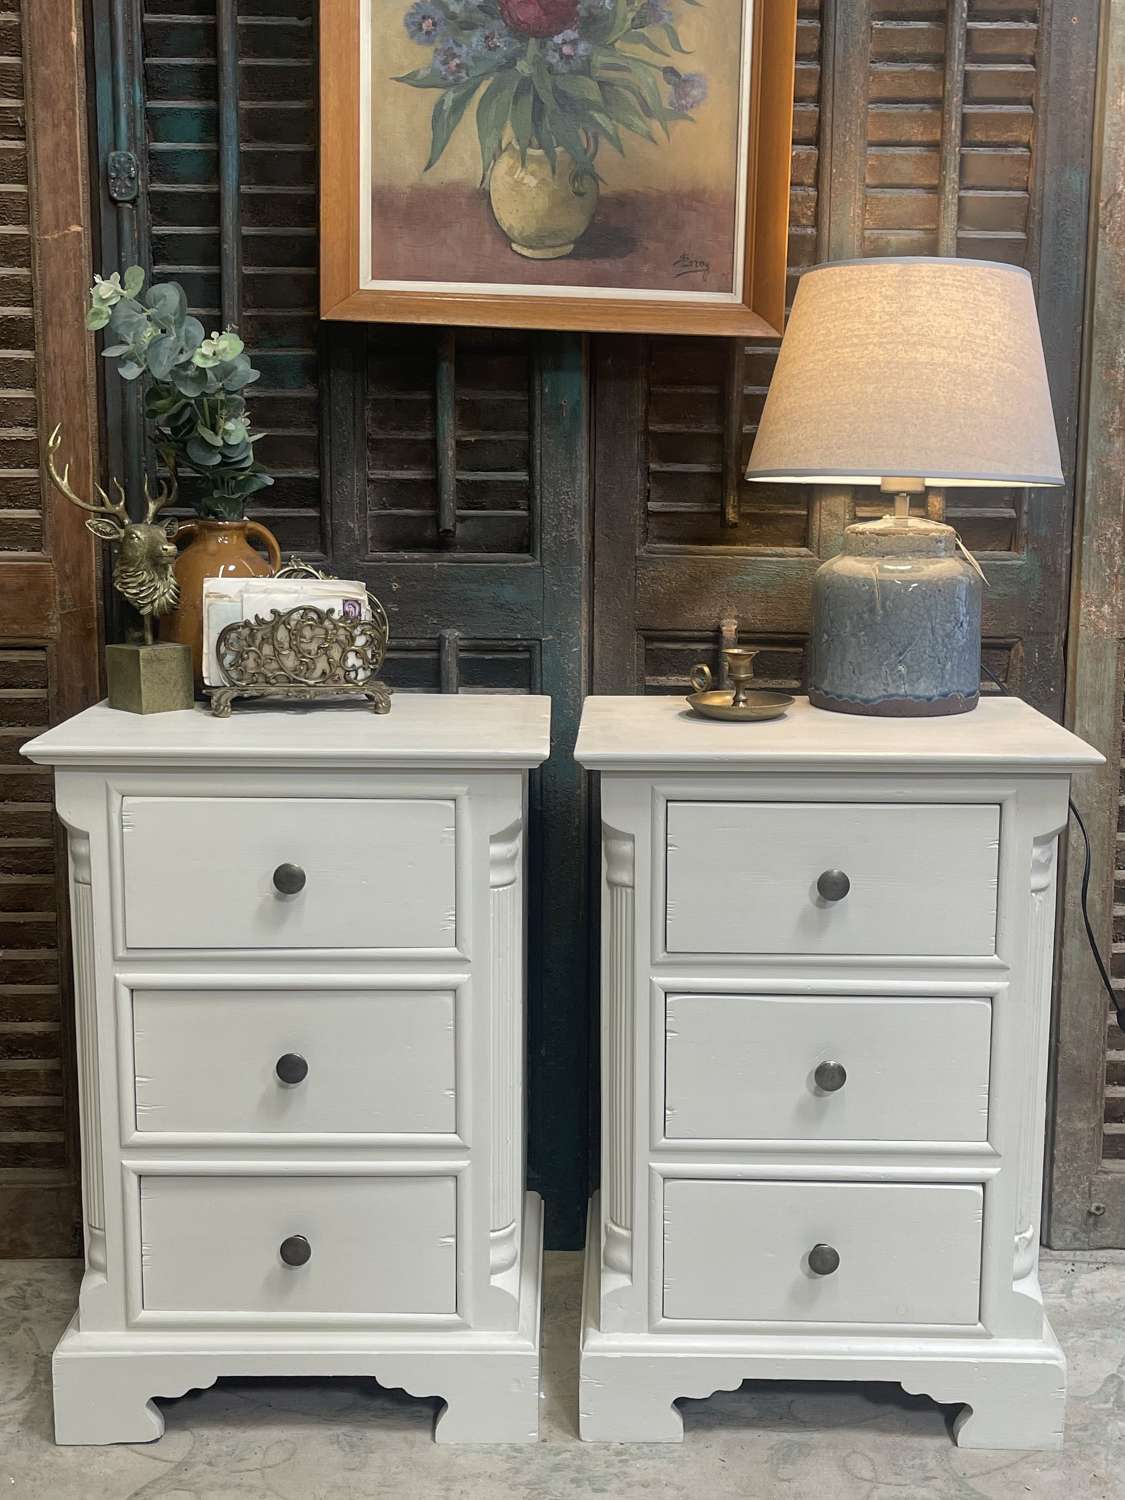 Pair of Painted Country Pine Bedside Chest of Drawers